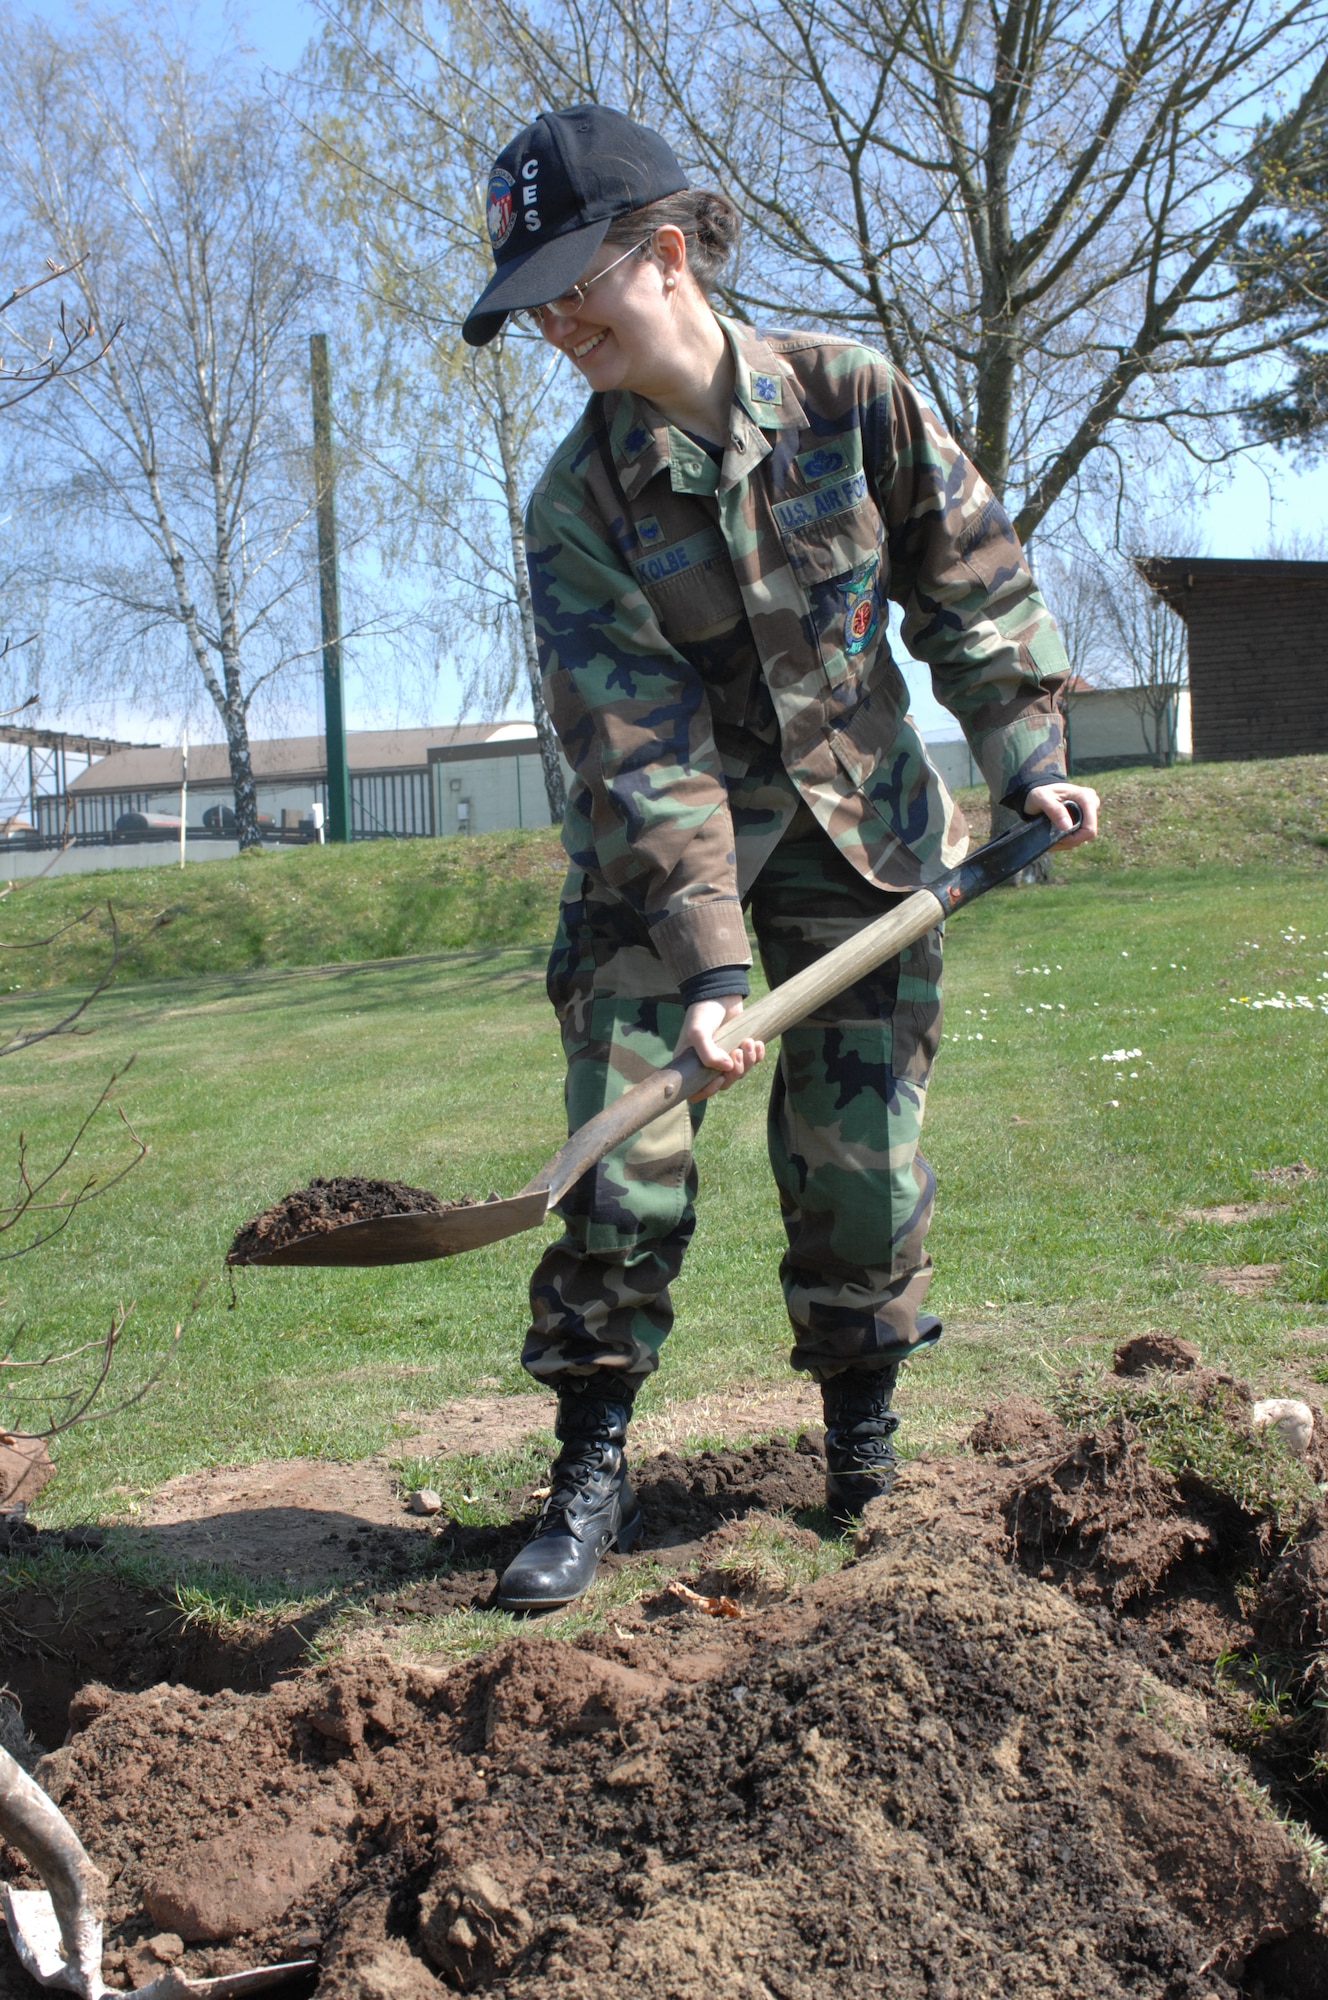 SPANGDAHLEM AIR BASE, Germany – Lt. Col. Kathryn Kolbe, 52nd Civil Engineer Squadron commander, does her part to help the environment by planting a tree at the Eifel Mountain Golf Course April 18, 2008. Various leaders from across Spangdahlem Air Base joined to help beautify the base with various trees and shrubberies in honor of Earth Week. (U.S. Air Force Photo/Airman 1st Class Jenifer Calhoun)